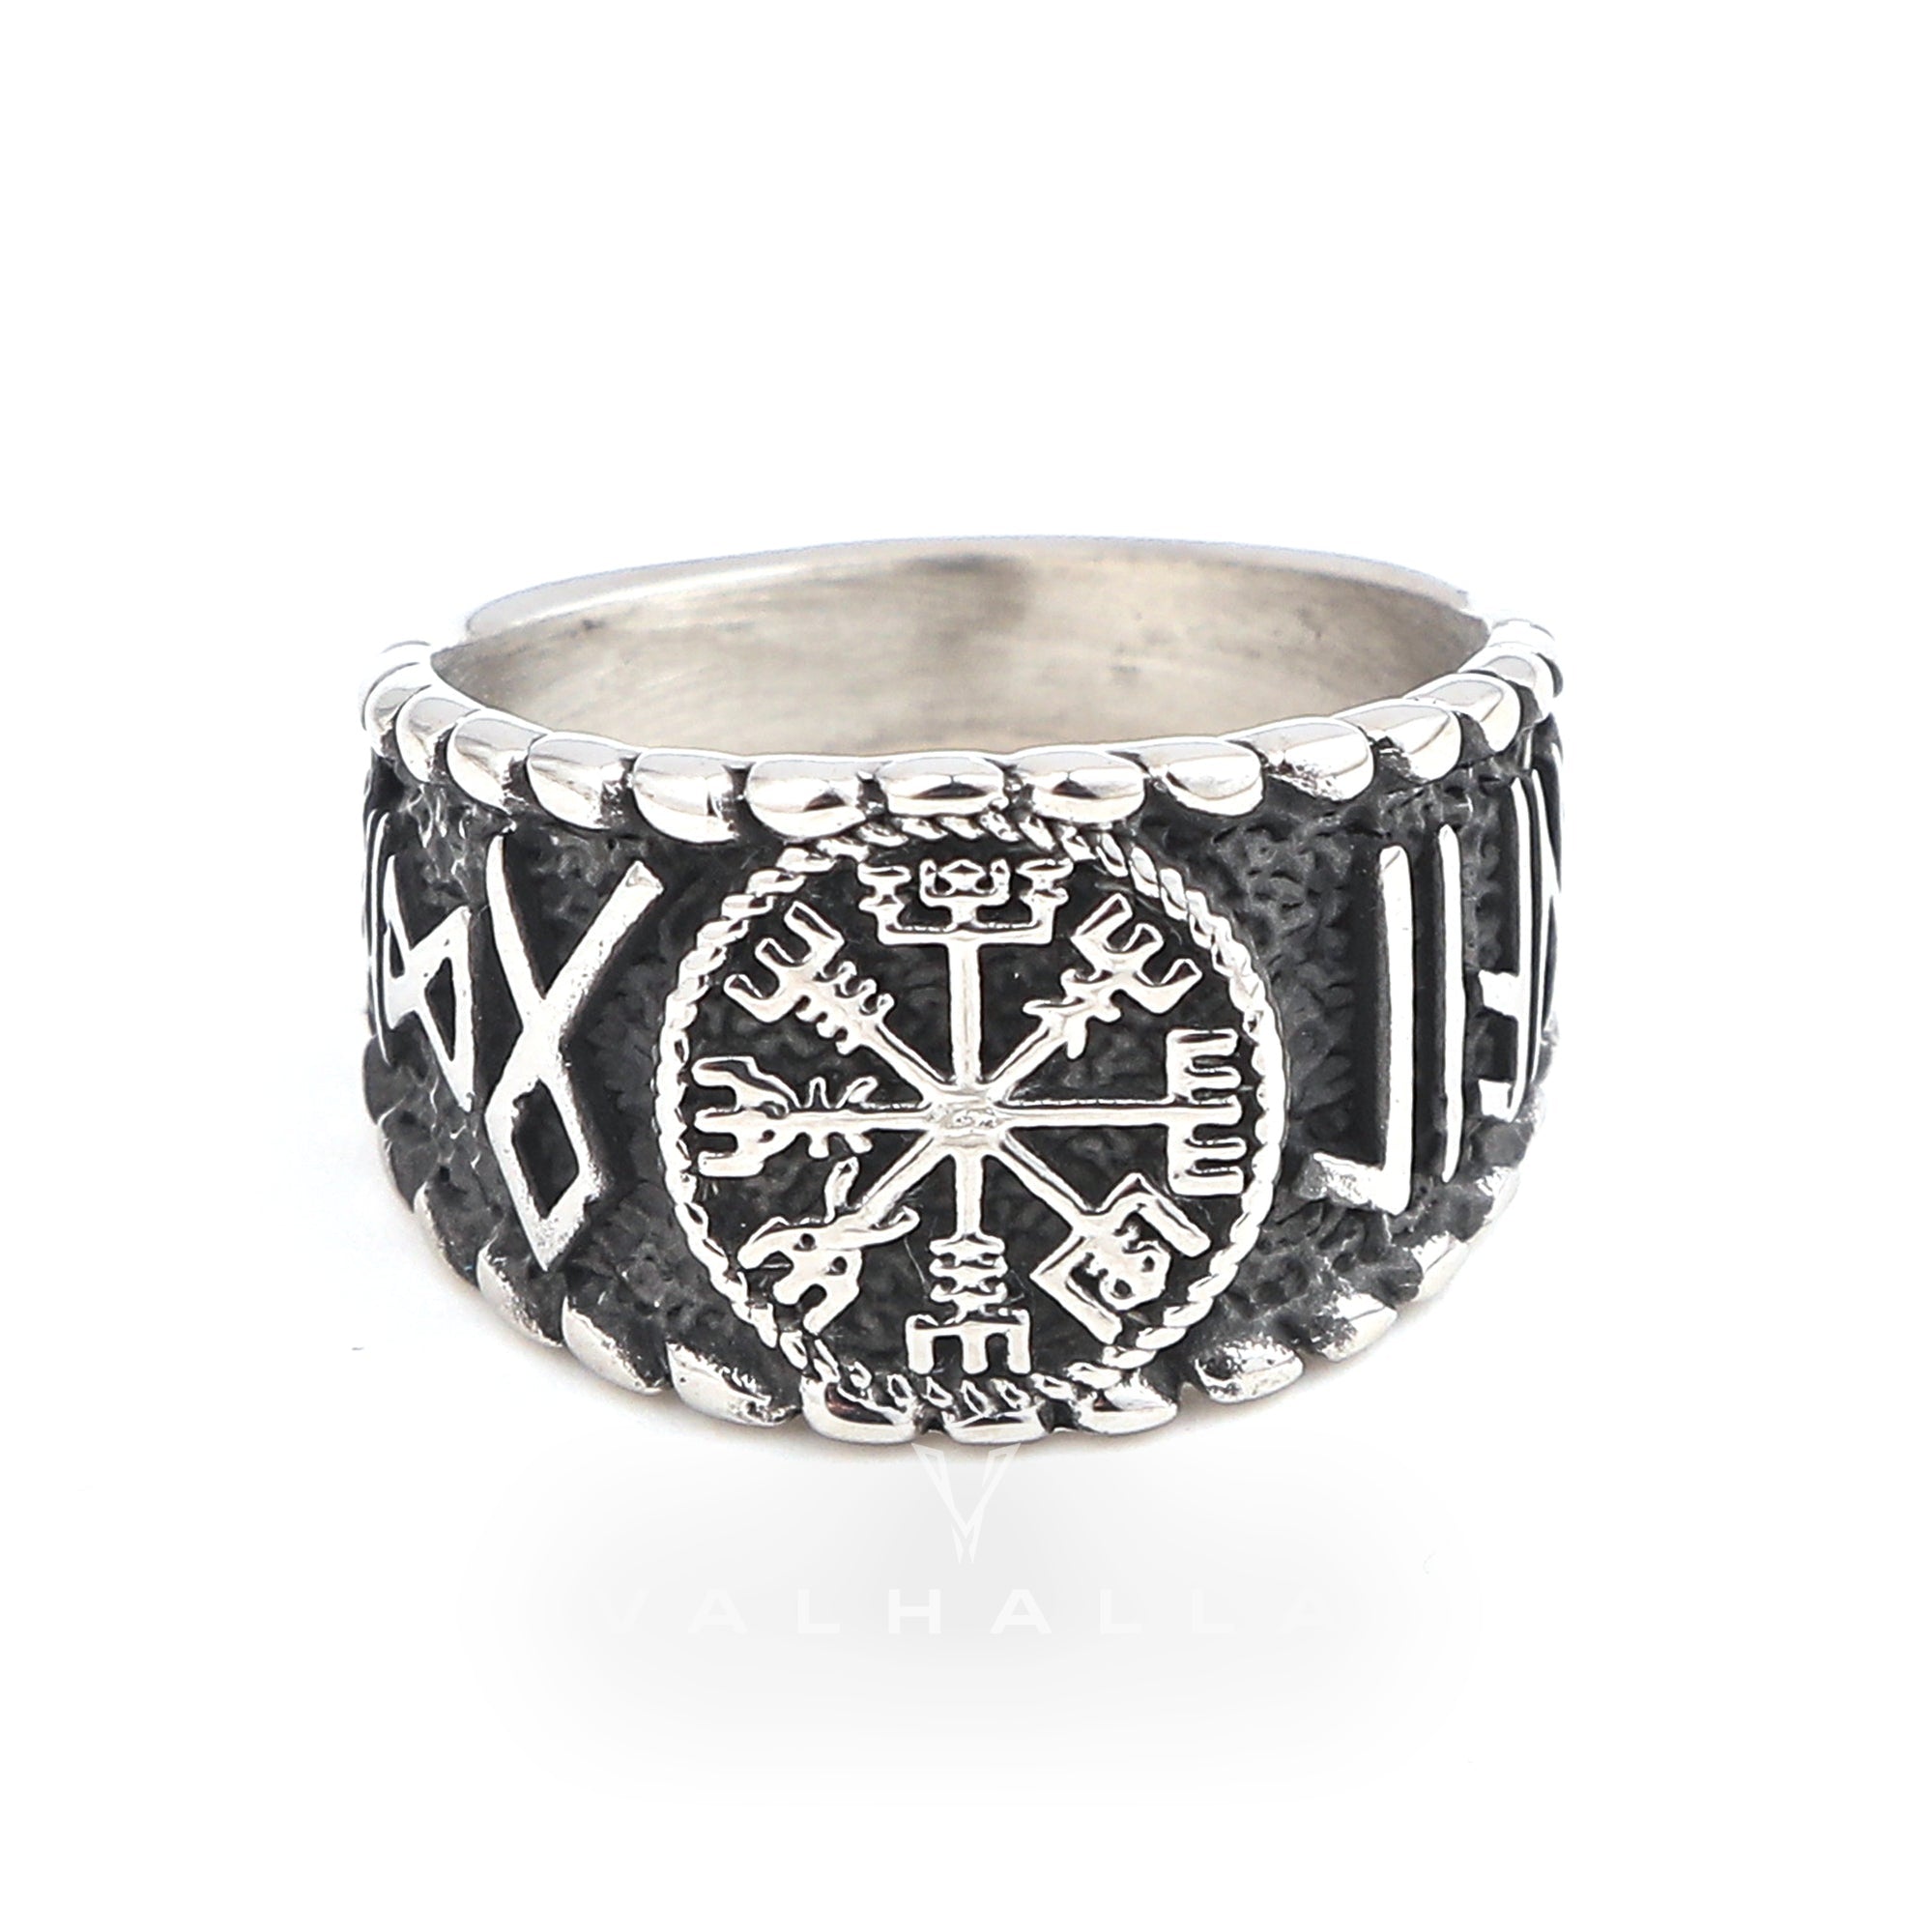 Handcrafted Stainless Steel Vegvisir and Runes Ring